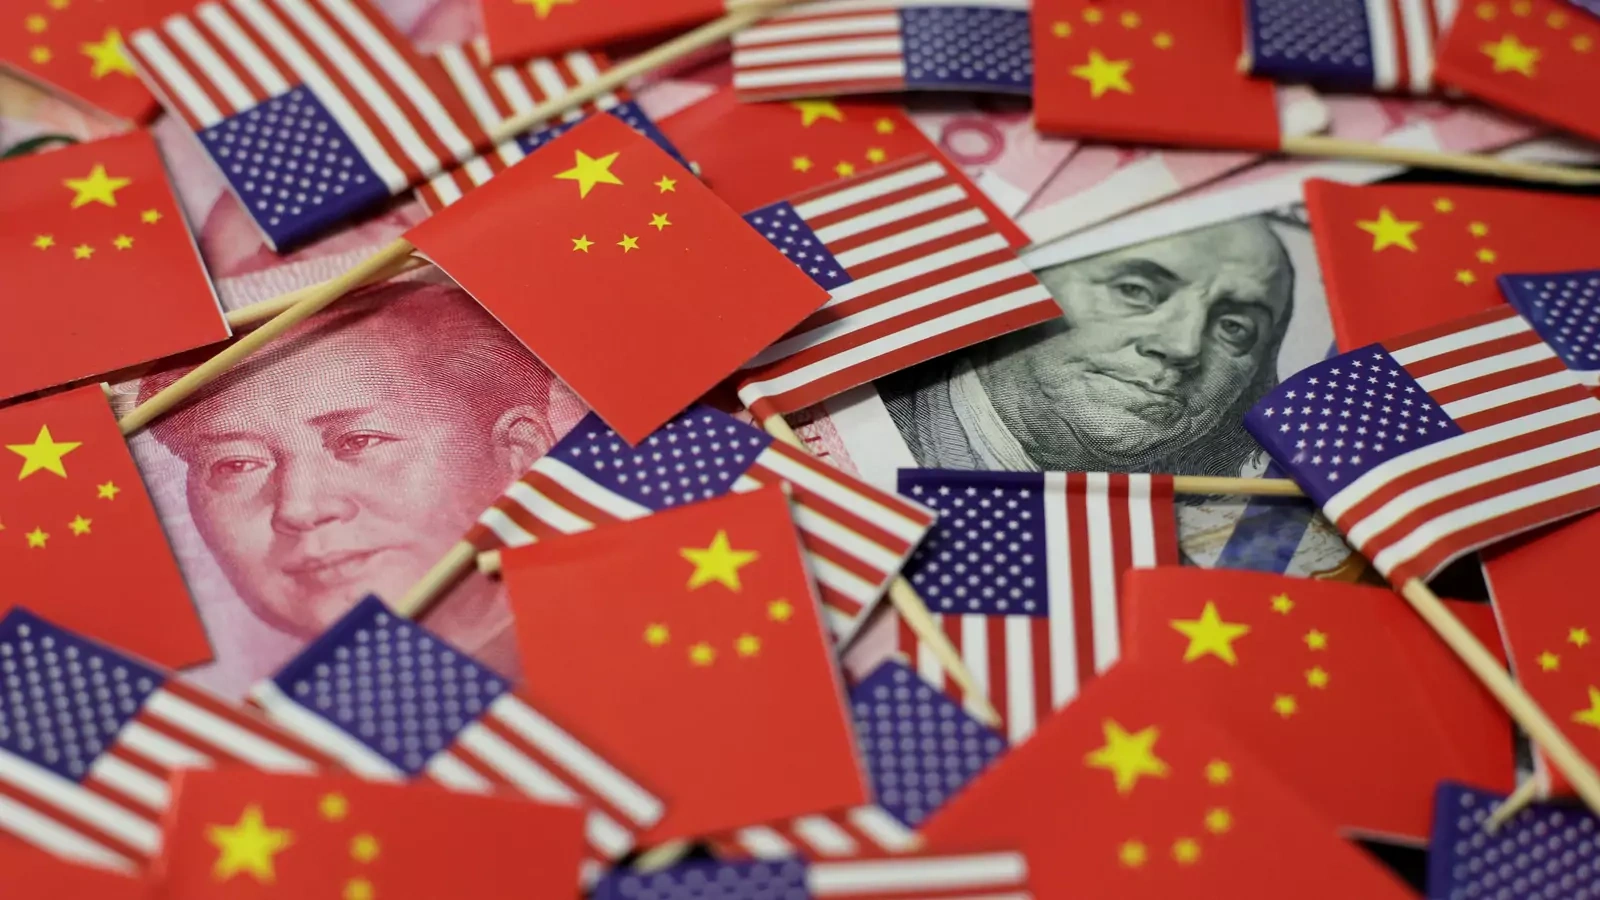 A U.S. dollar banknote featuring American founding father Benjamin Franklin and a China's yuan banknote featuring late Chinese chairman Mao Zedong are seen among U.S. and Chinese flags in this illustration picture taken May 20, 2019. 